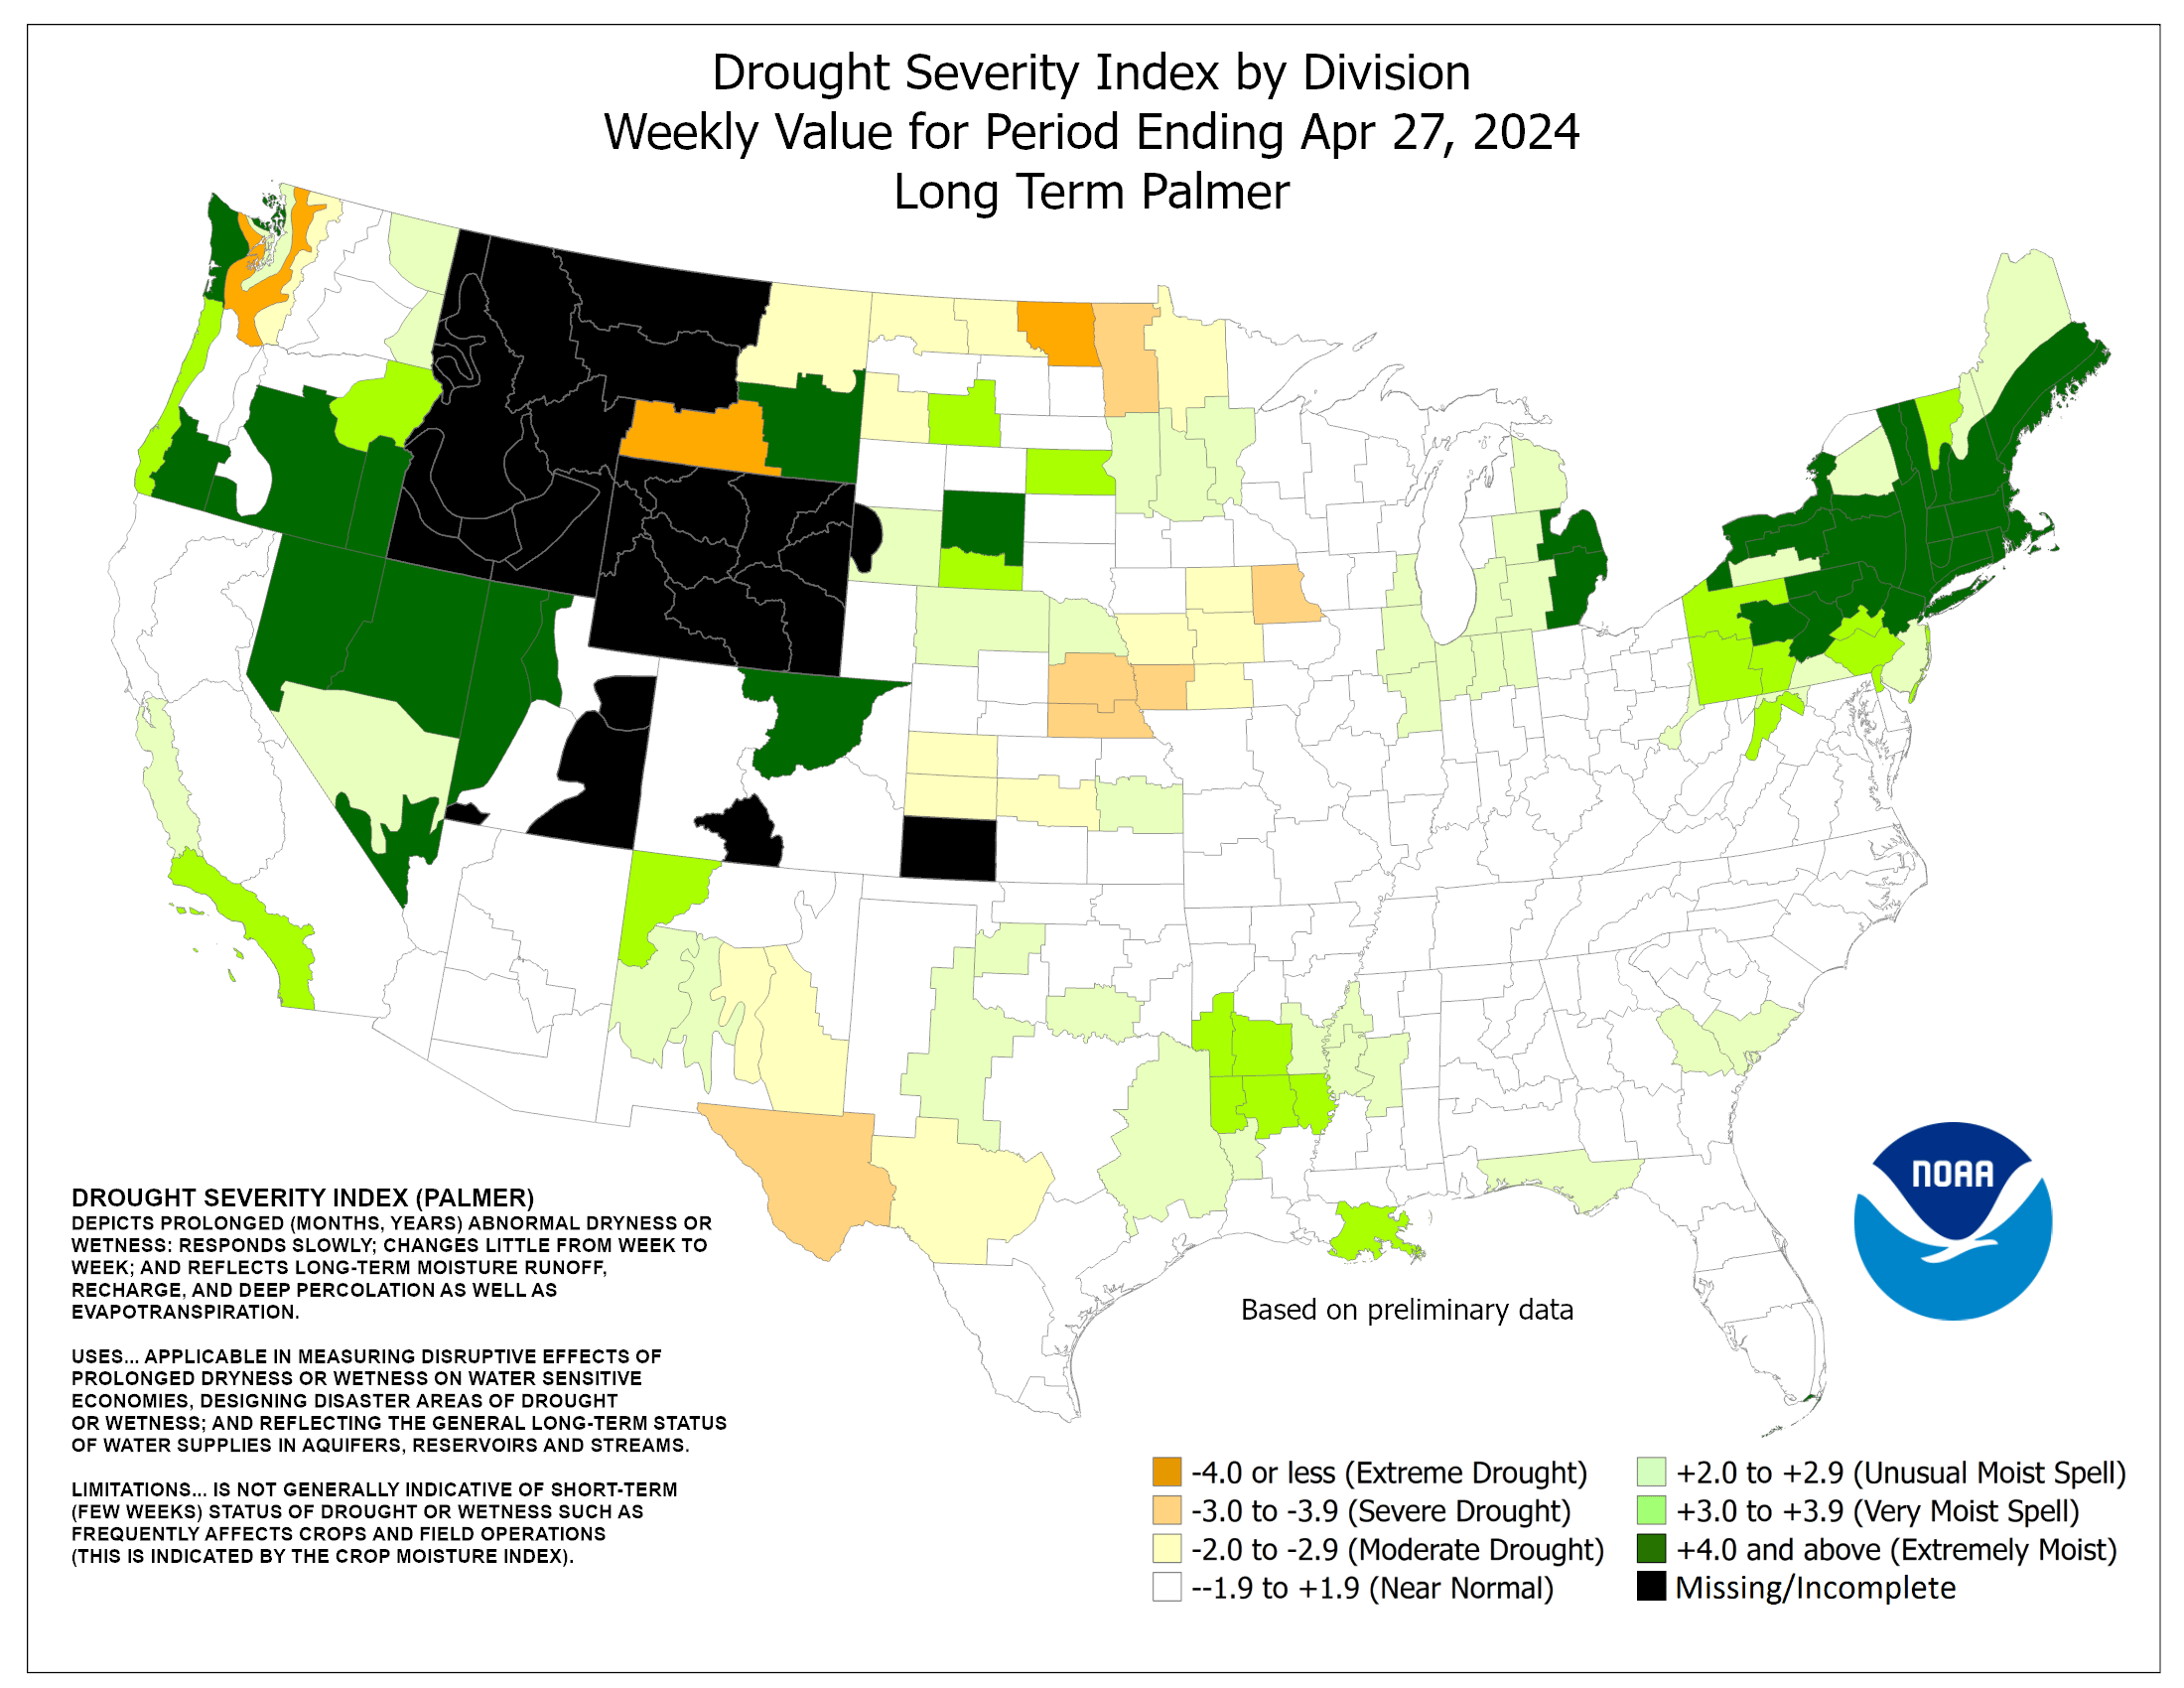 Parlmer Drought Severity Index